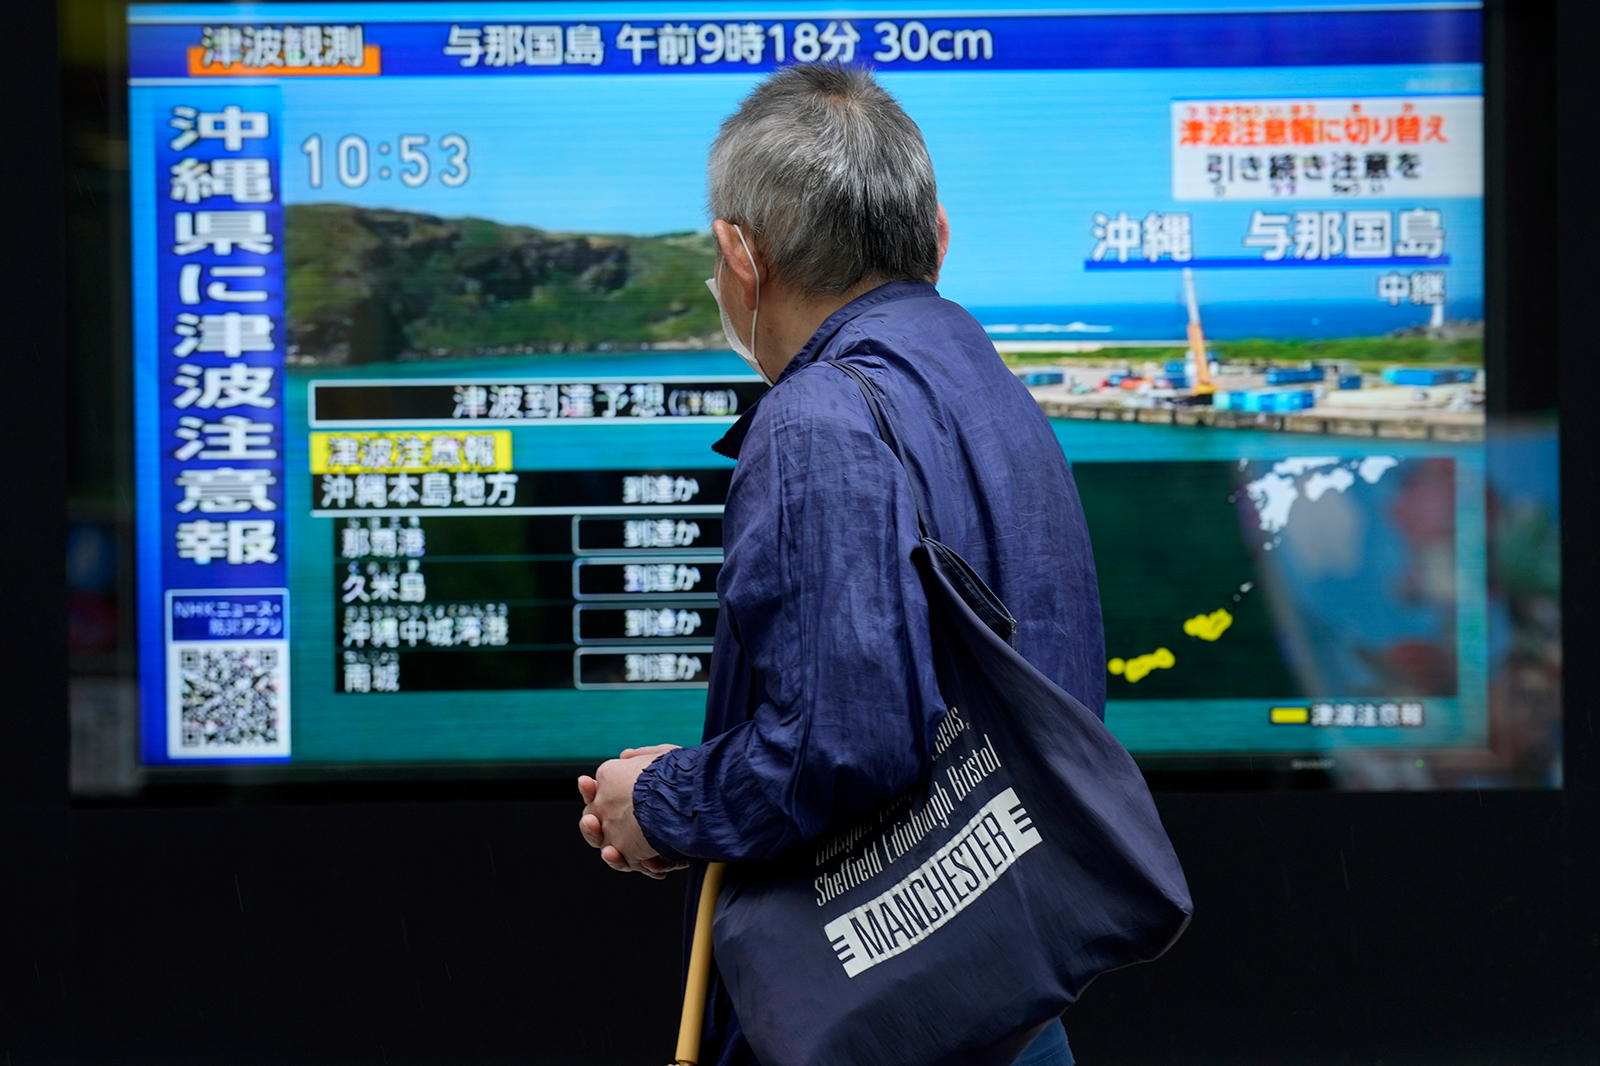 A man stands along a sidewalk to watch a TV showing breaking news on the tsunami advisory for the Okinawa region on Wednesday, April 3, in Tokyo. 